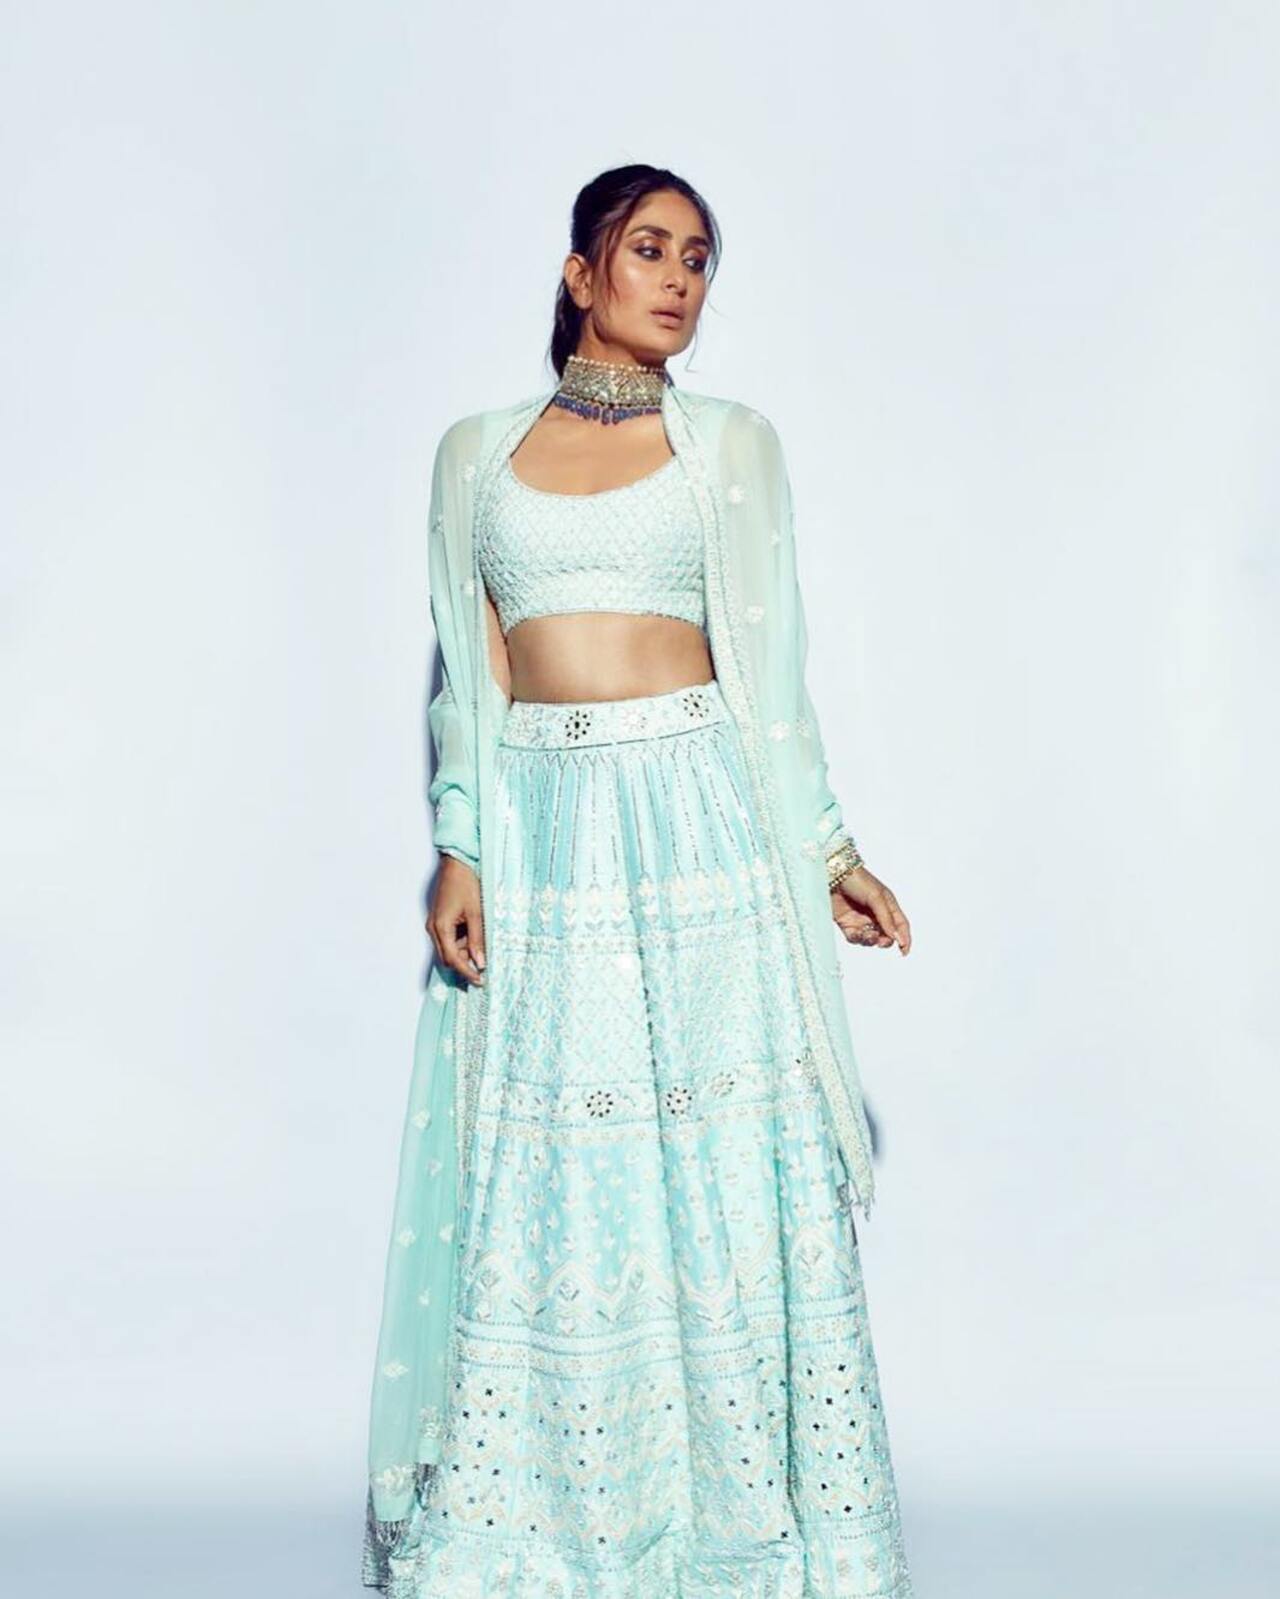 B-town's leading ladies are also leading the way by giving us style hacks on how we can fashion our chikankari outfits for the upcoming festival season. Displaying her sculpted midriff in the pastel blue outfit, Kareena Kapoor accentuated her appearance with a tousled ponytail and a standout choker necklace